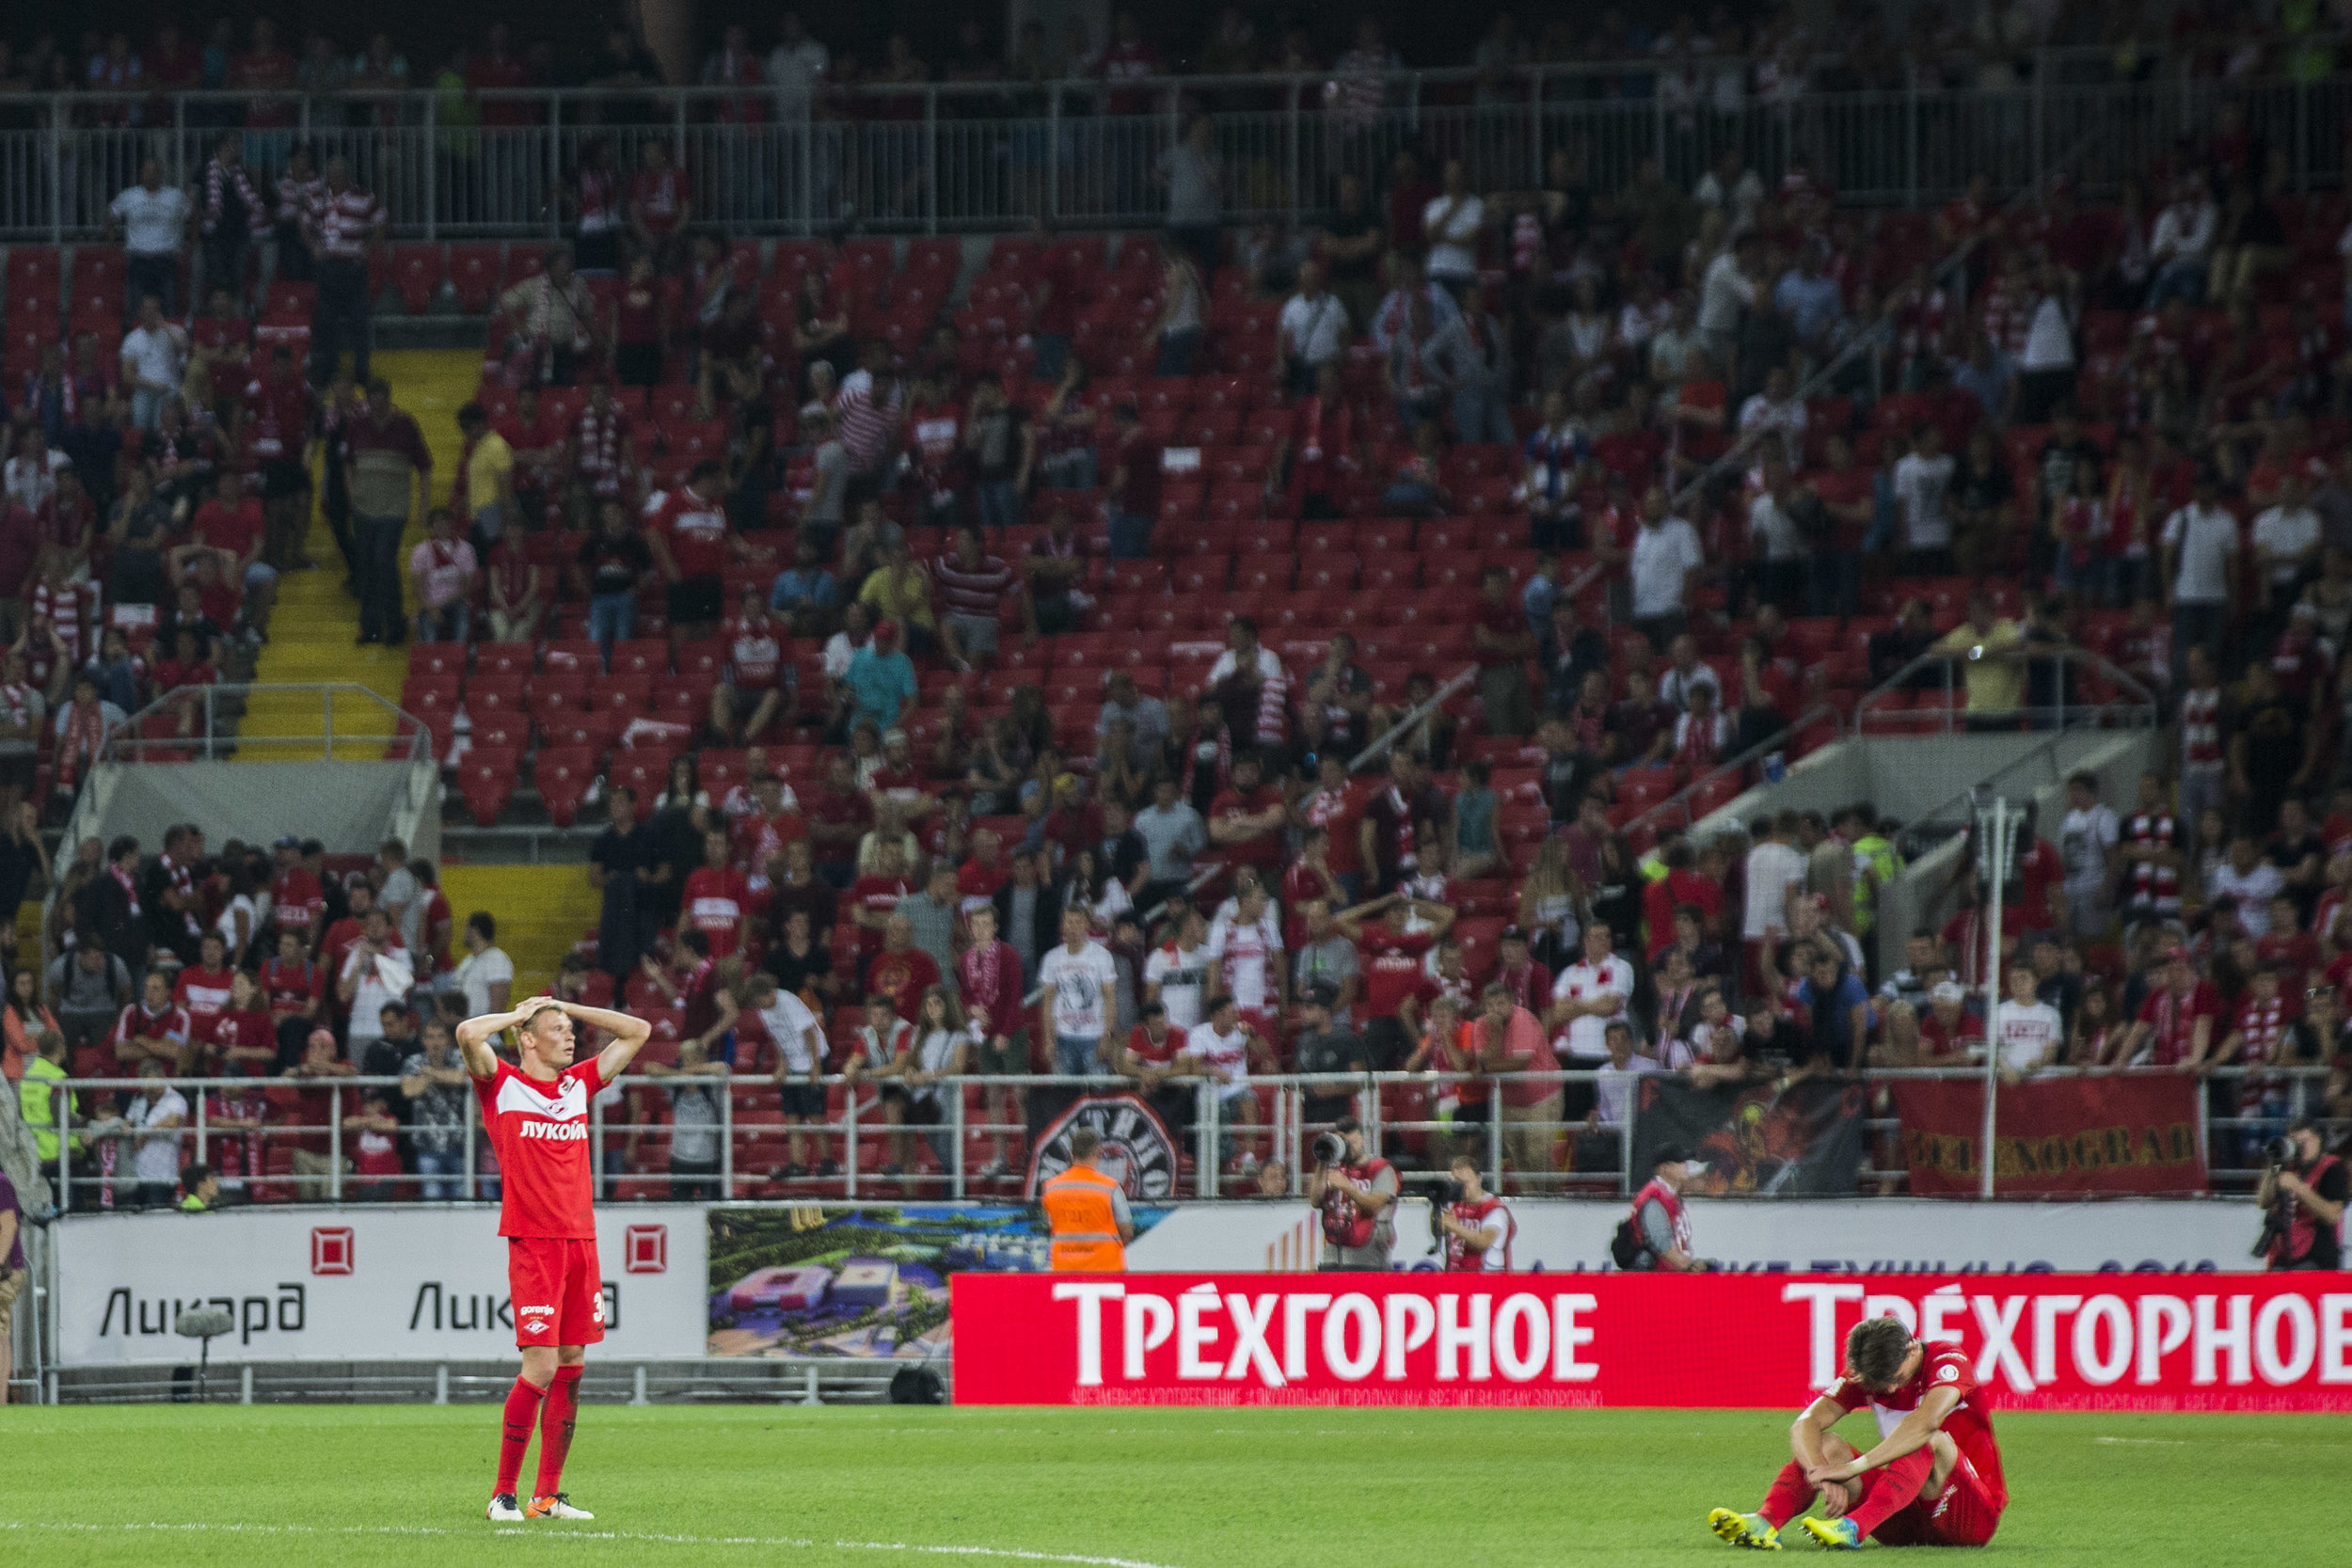  Spartak Moscow players Evgeny Makeev (left) and Ilya Kutepov react as their team loses in UEFA Europa League 3rd qualifying round to an underdog team AEK from Cyprus. August 4th, 2016 